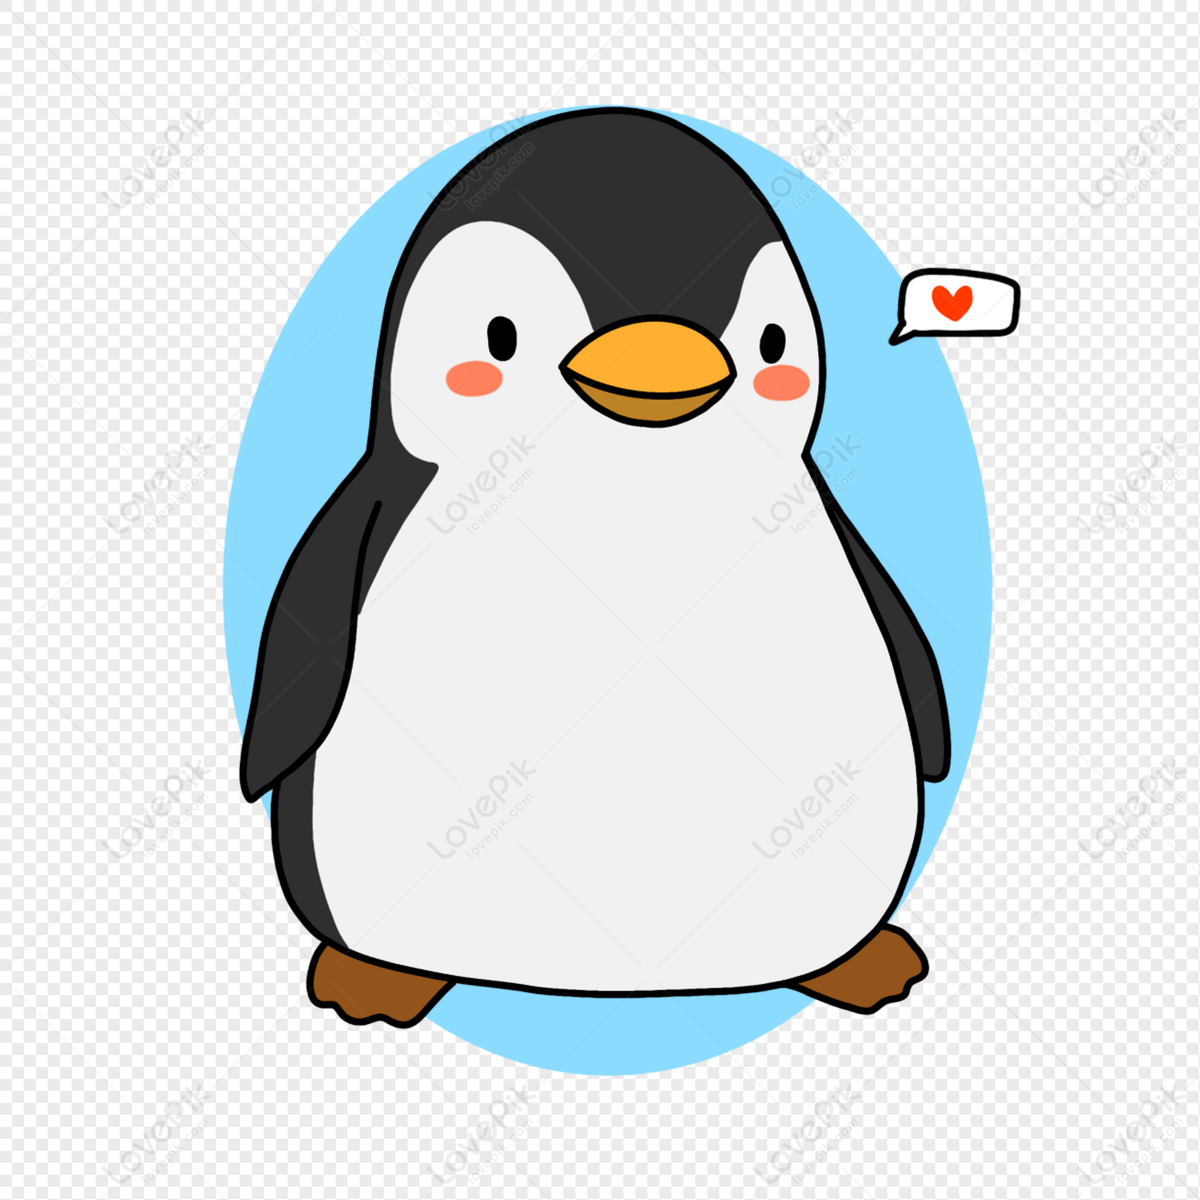 Cartoon Penguin Love PNG Transparent Background And Clipart Image For Free  Download - Lovepik | 401456890